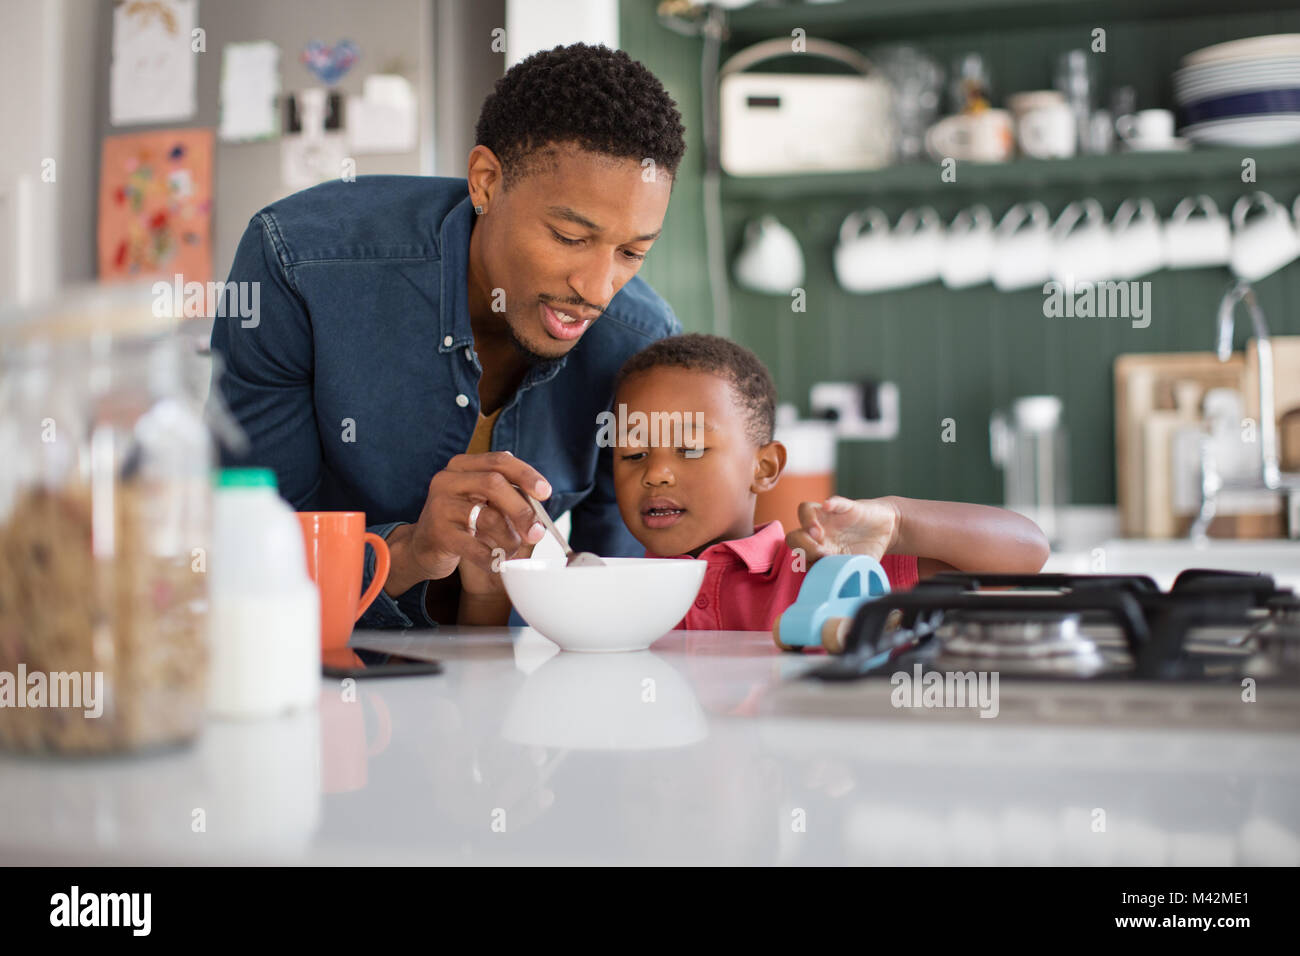 Dad helping son with breakfast Stock Photo